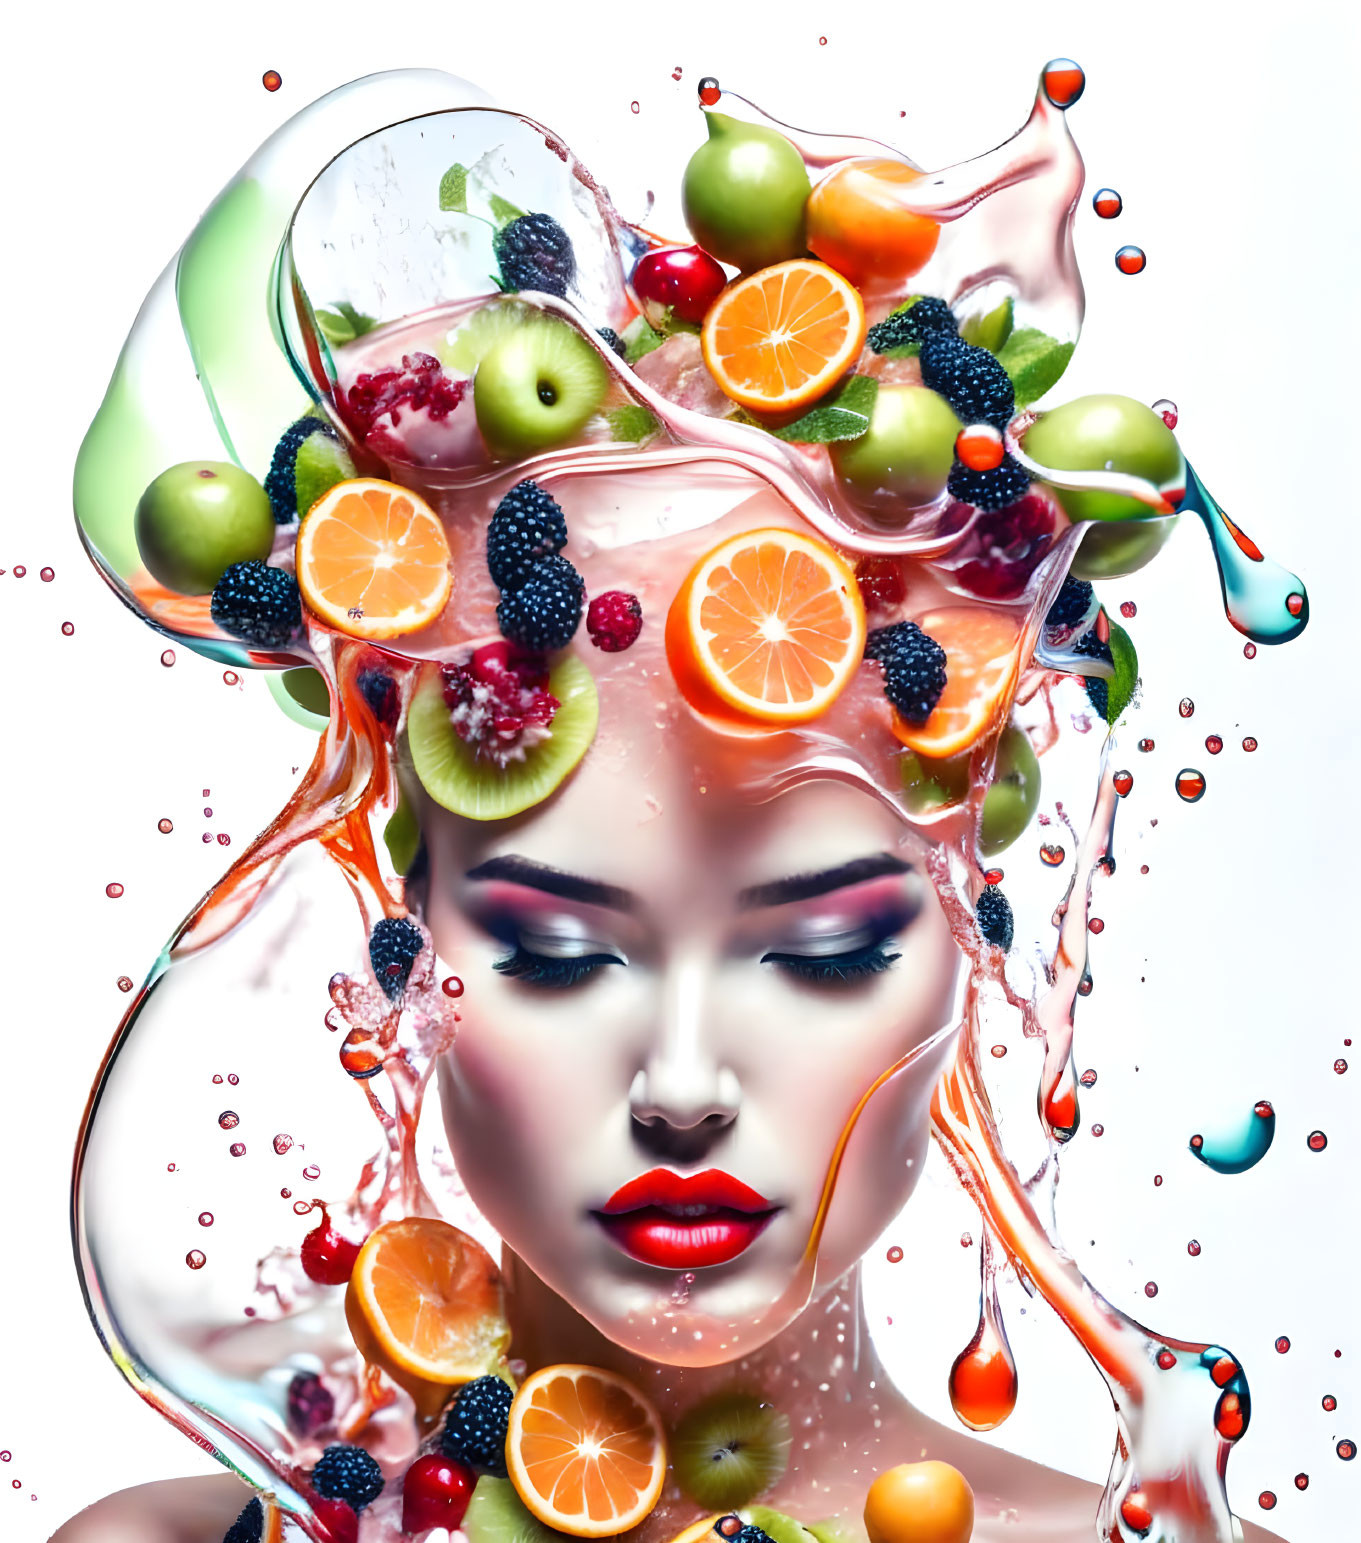 Surreal portrait: Woman with liquid splashes and fruit cascade